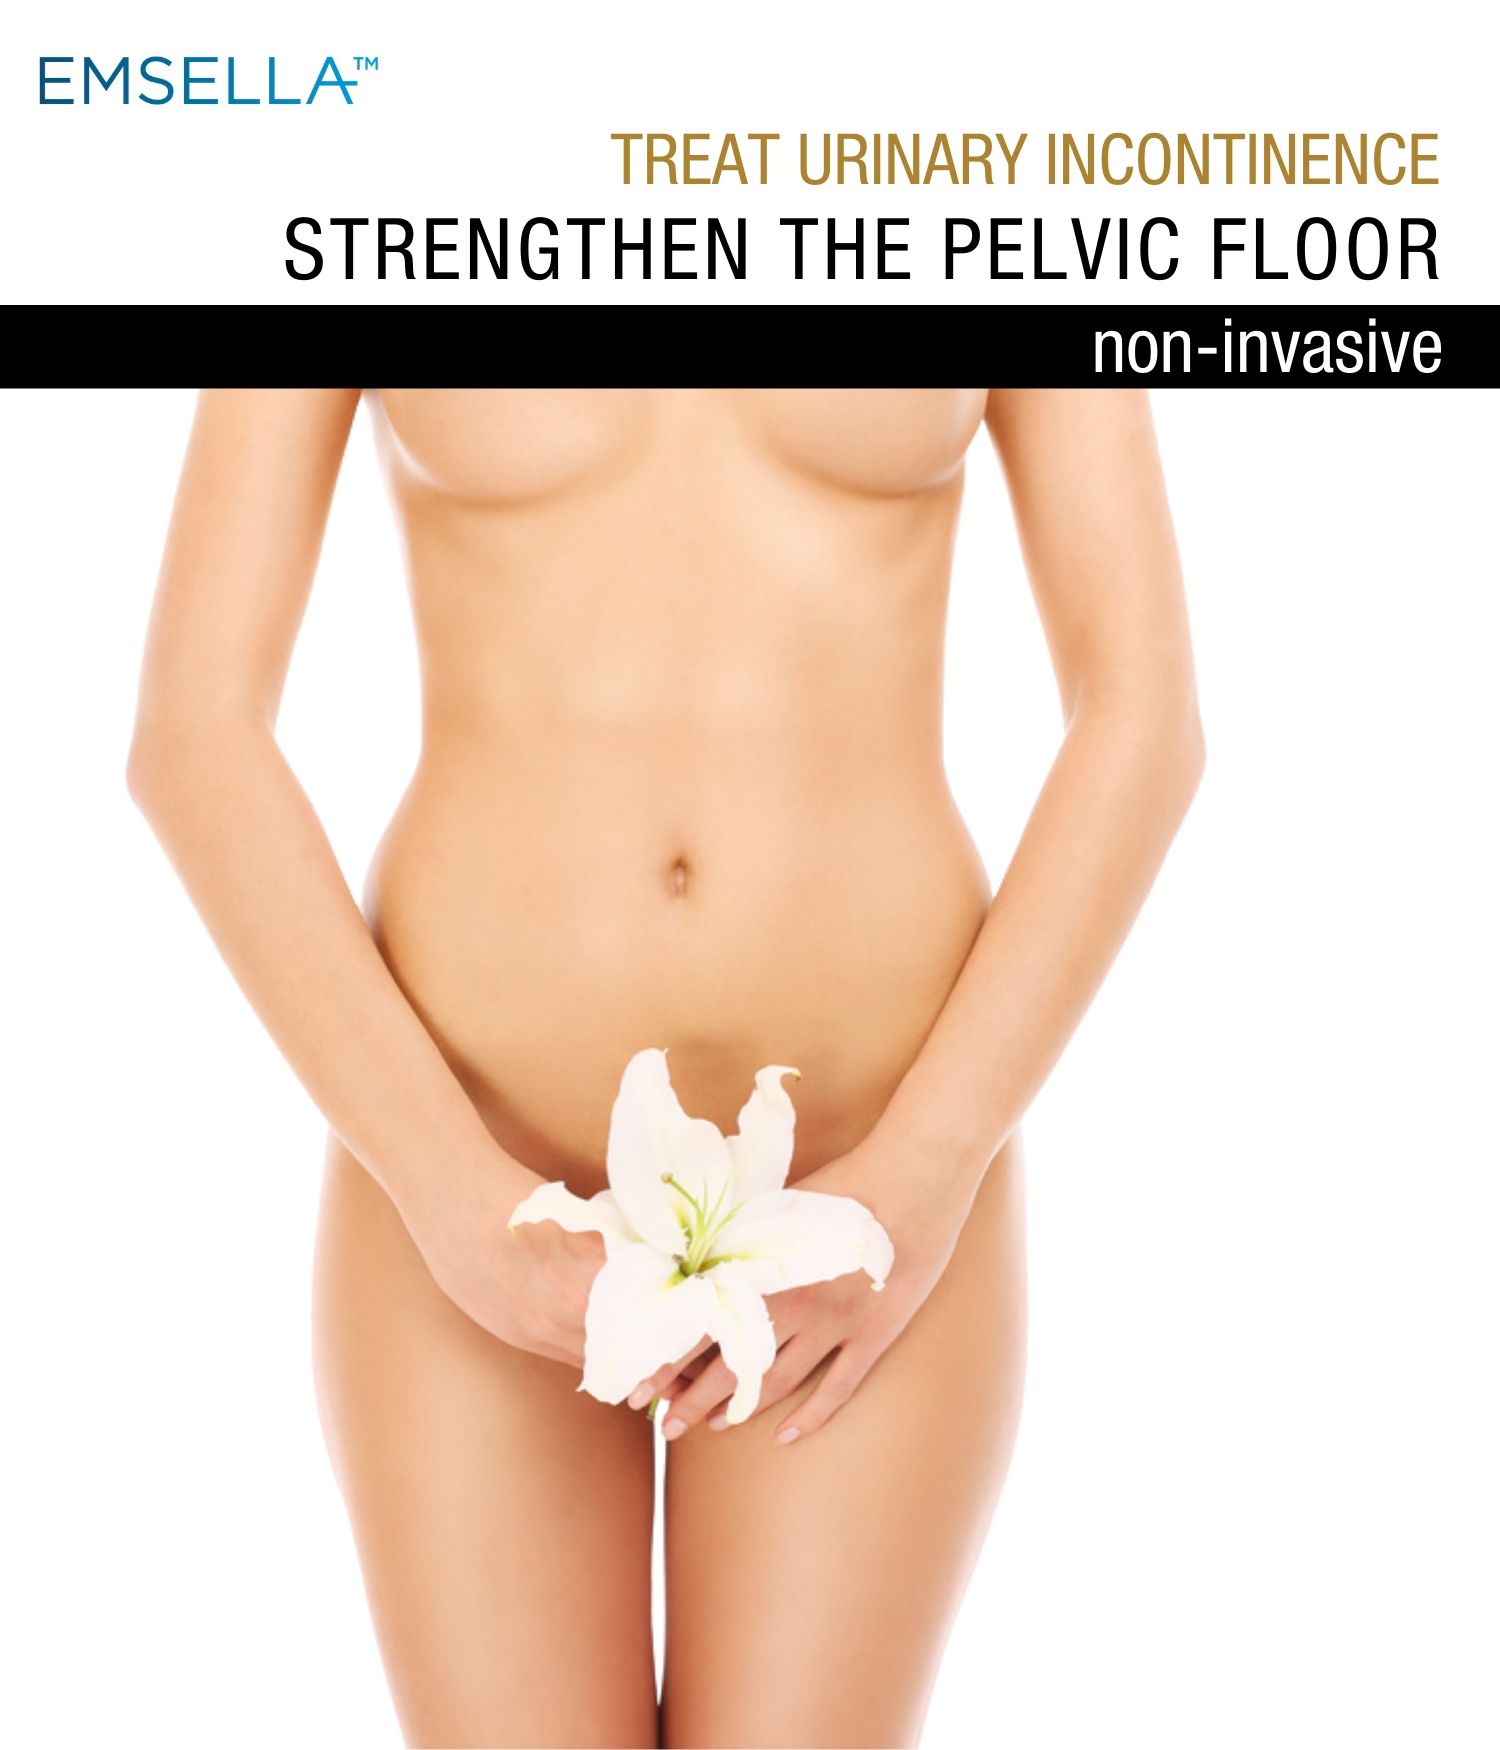 Unclothed woman holds a flower over her lower anatomy to represent Emsella.